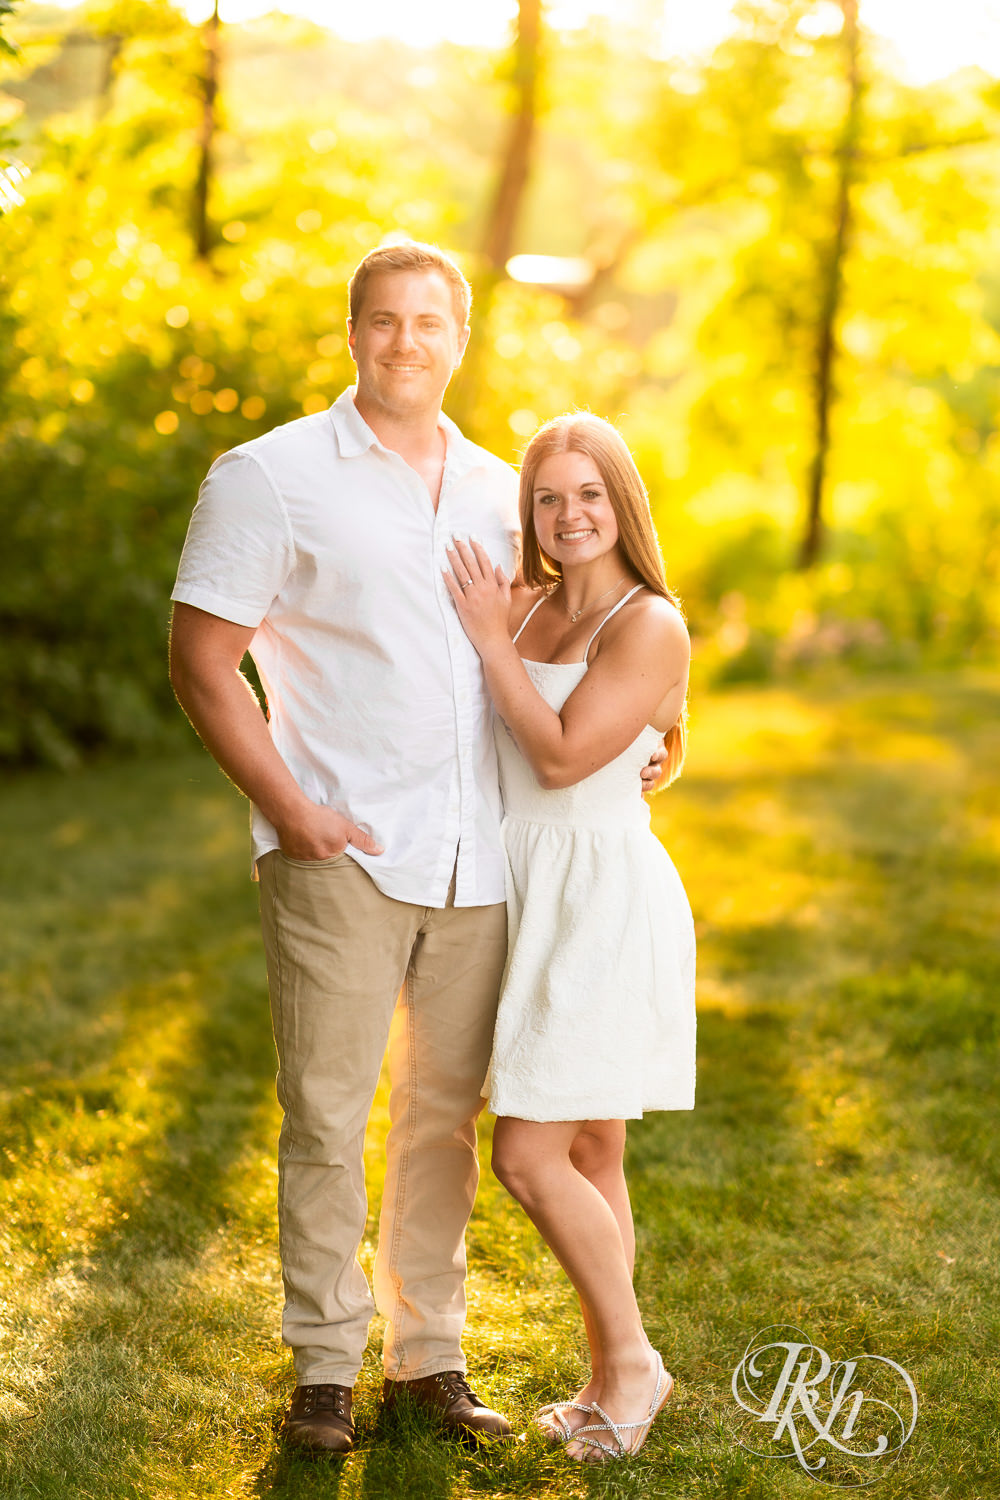 Man in white shirt and woman in white dress smile during golden hour engagement photography at Lebanon Hills in Eagan, Minnesota.